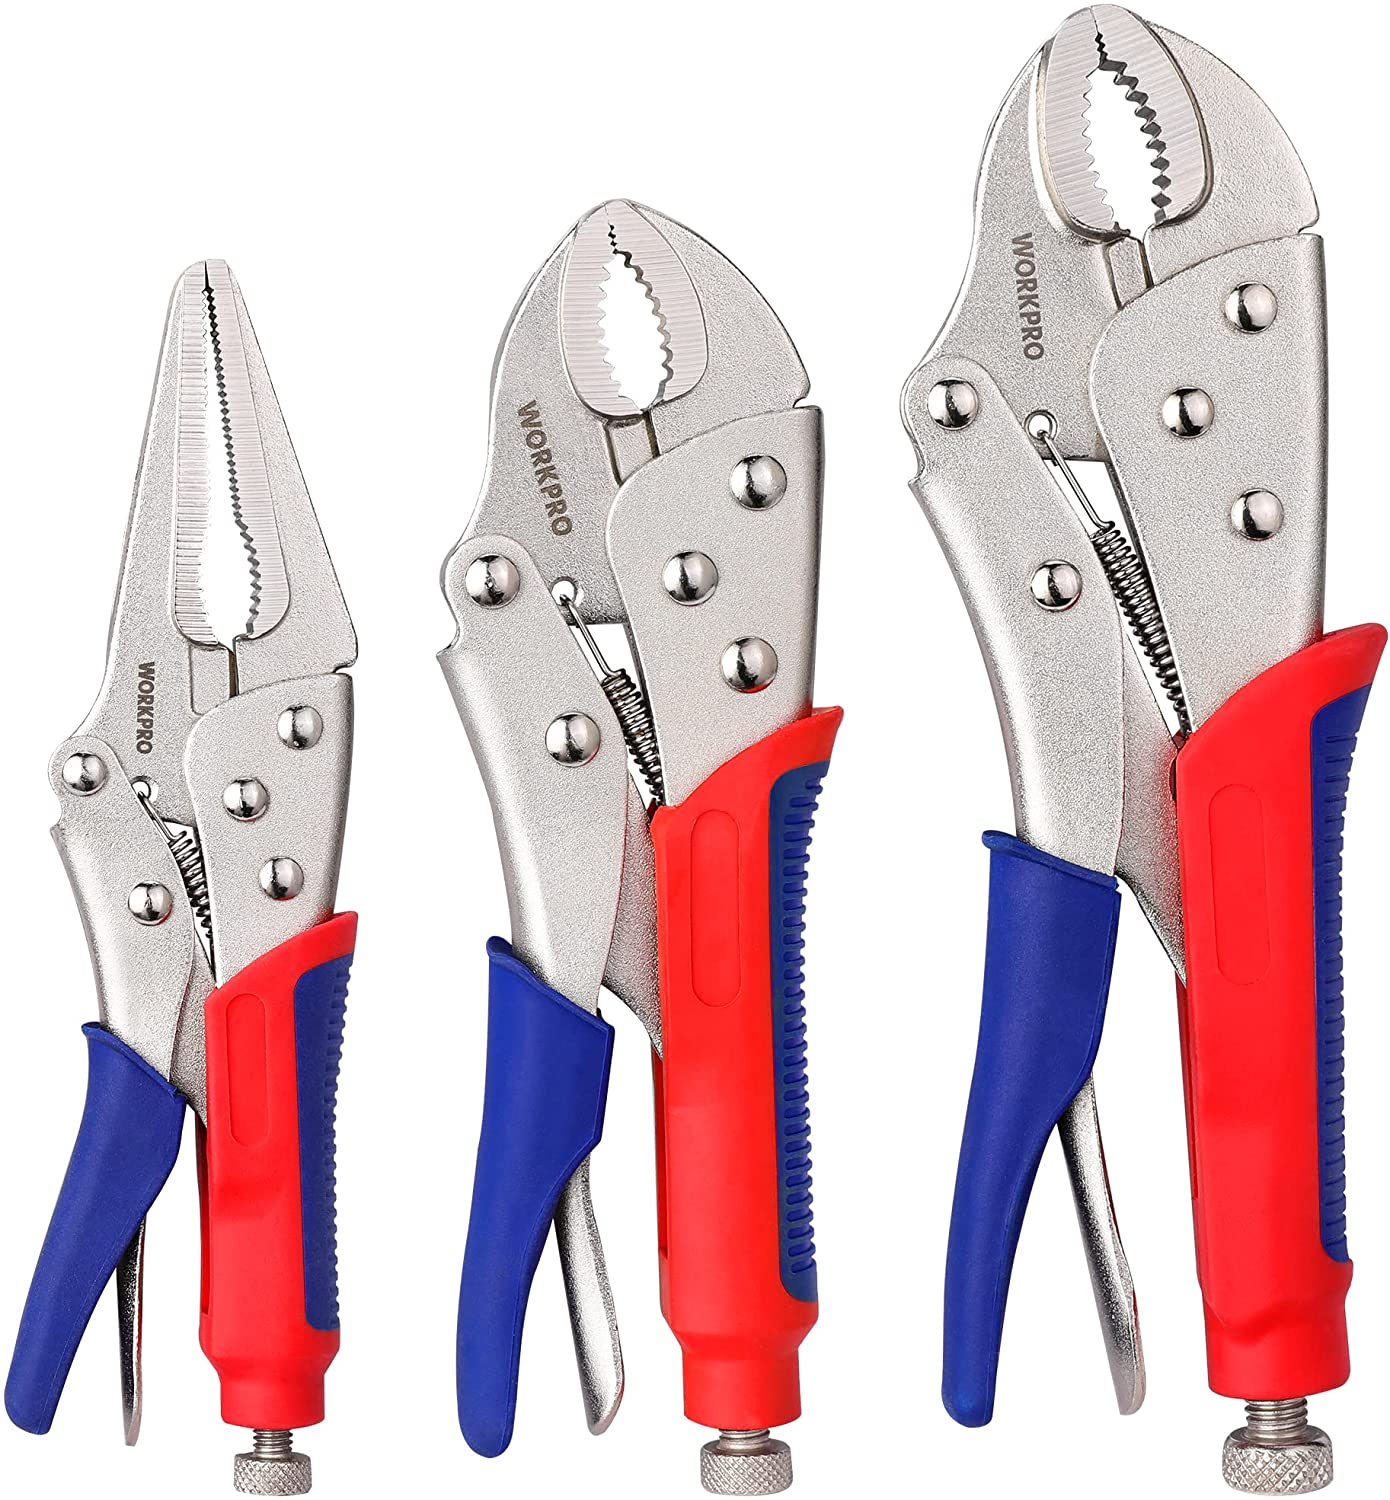 3-Piece Locking Pliers Set, 10-Inch Curved Jaw, 7-Inch Curved Jaw and 6-1/2-Inch Straight Jaw